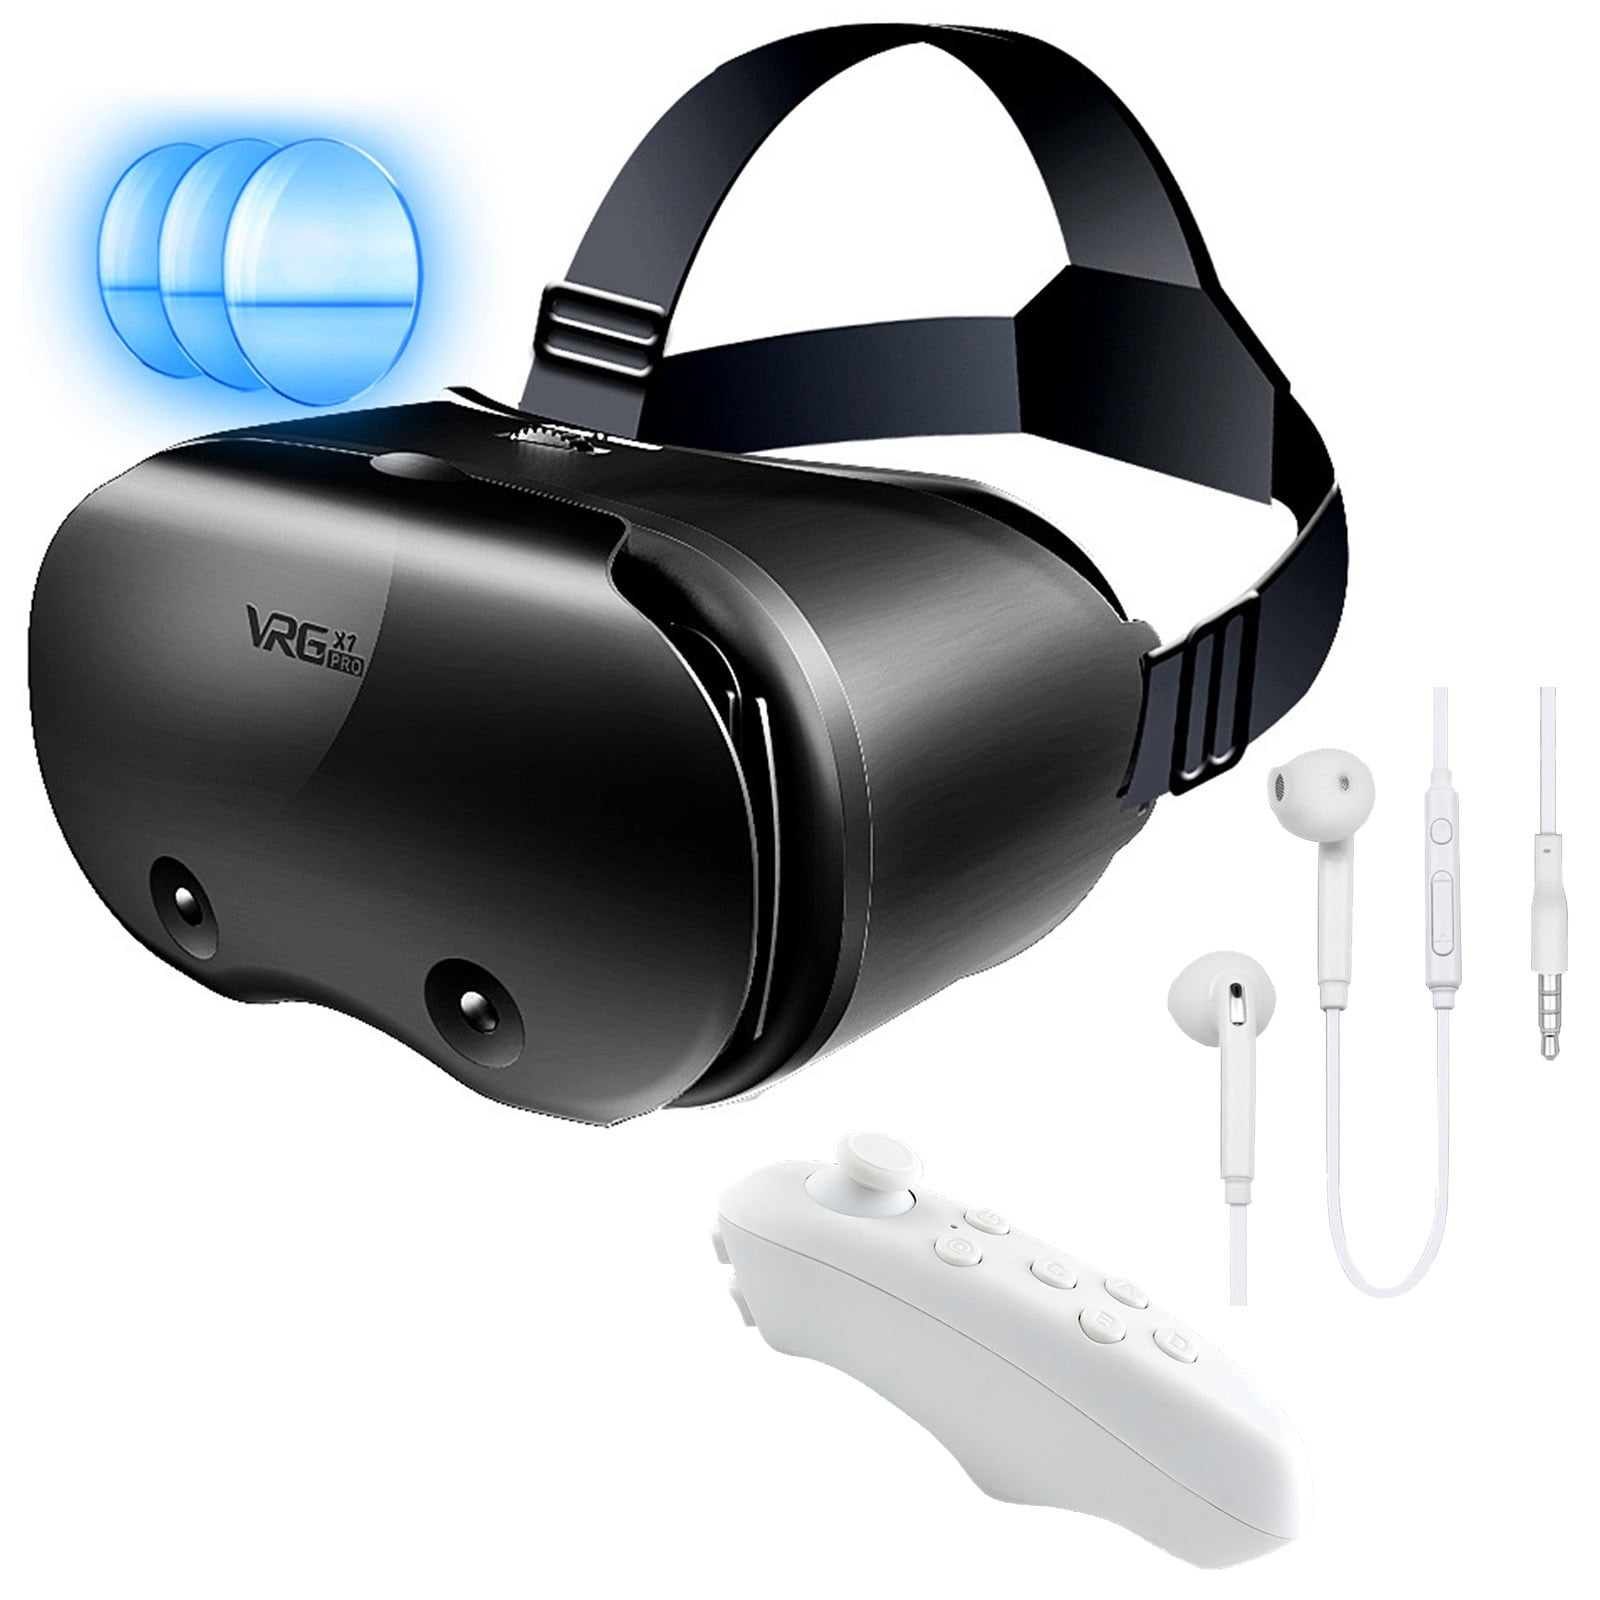 Uforudsete omstændigheder matematiker Personlig PC,laptop,accessories,ear buds,Vr Headset For Iphone And Android Phones VR  Glasses Mobile Phone Dedicated Virtual Reality 3D Glasses Meta Universe -  Walmart.com